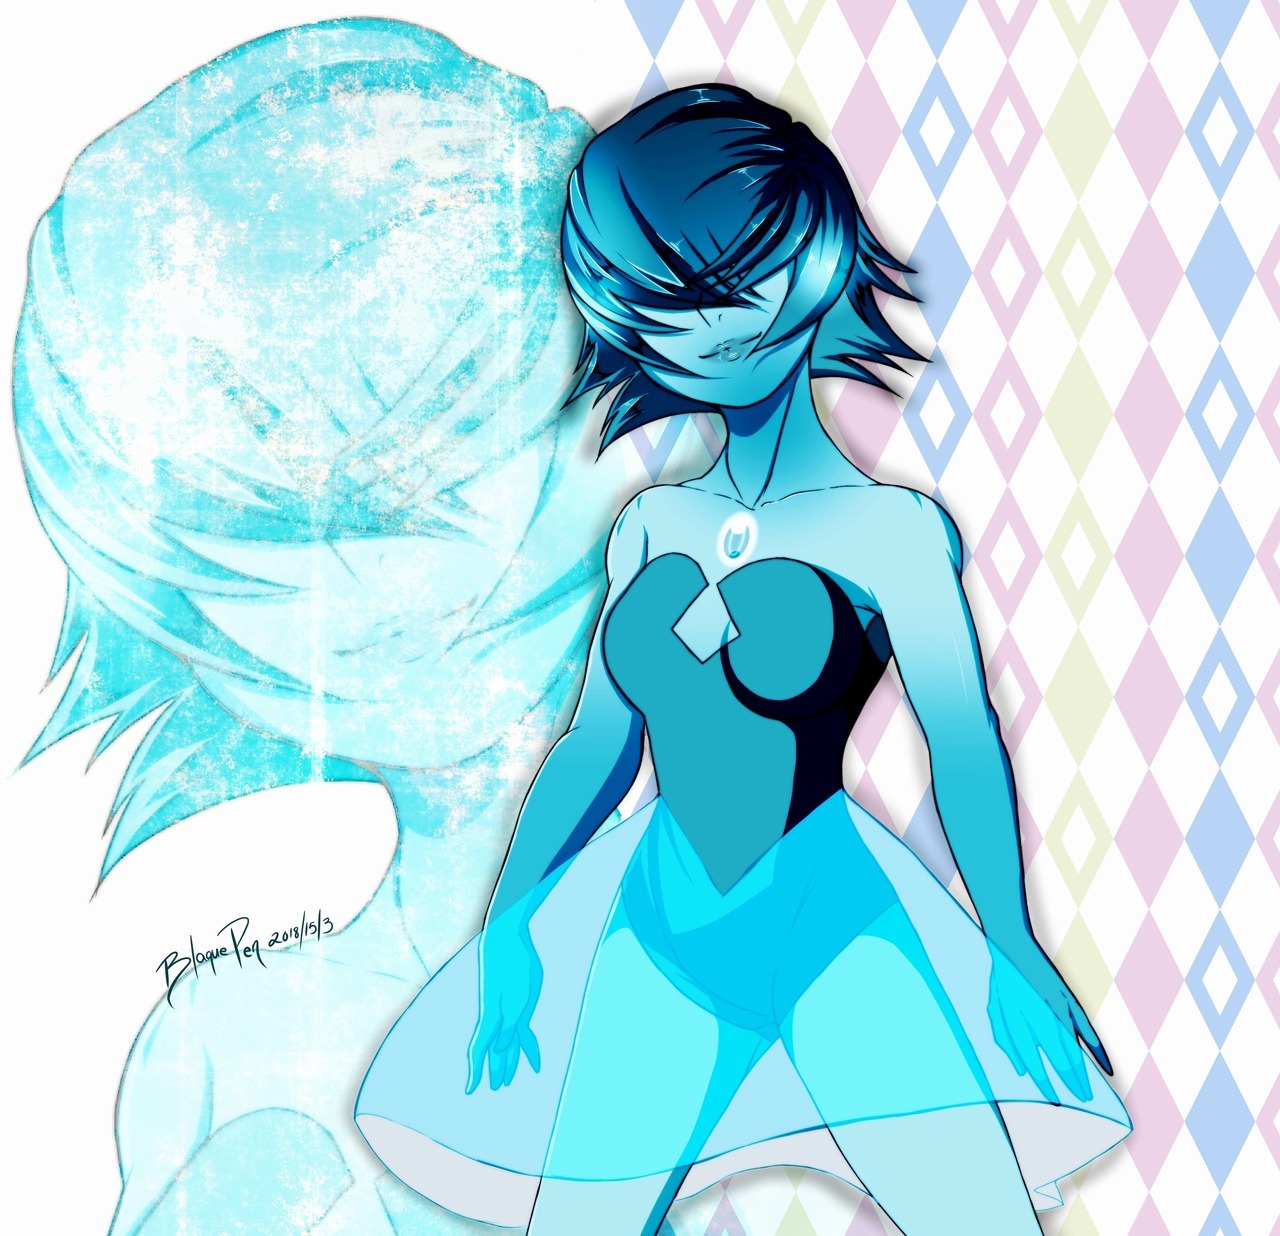 I did this fan art piece of Blue Pearl just about a week ago. I wanna revisit this piece and make it better. The cell shading is off and it doesn’t really speak to me like I thought it would…